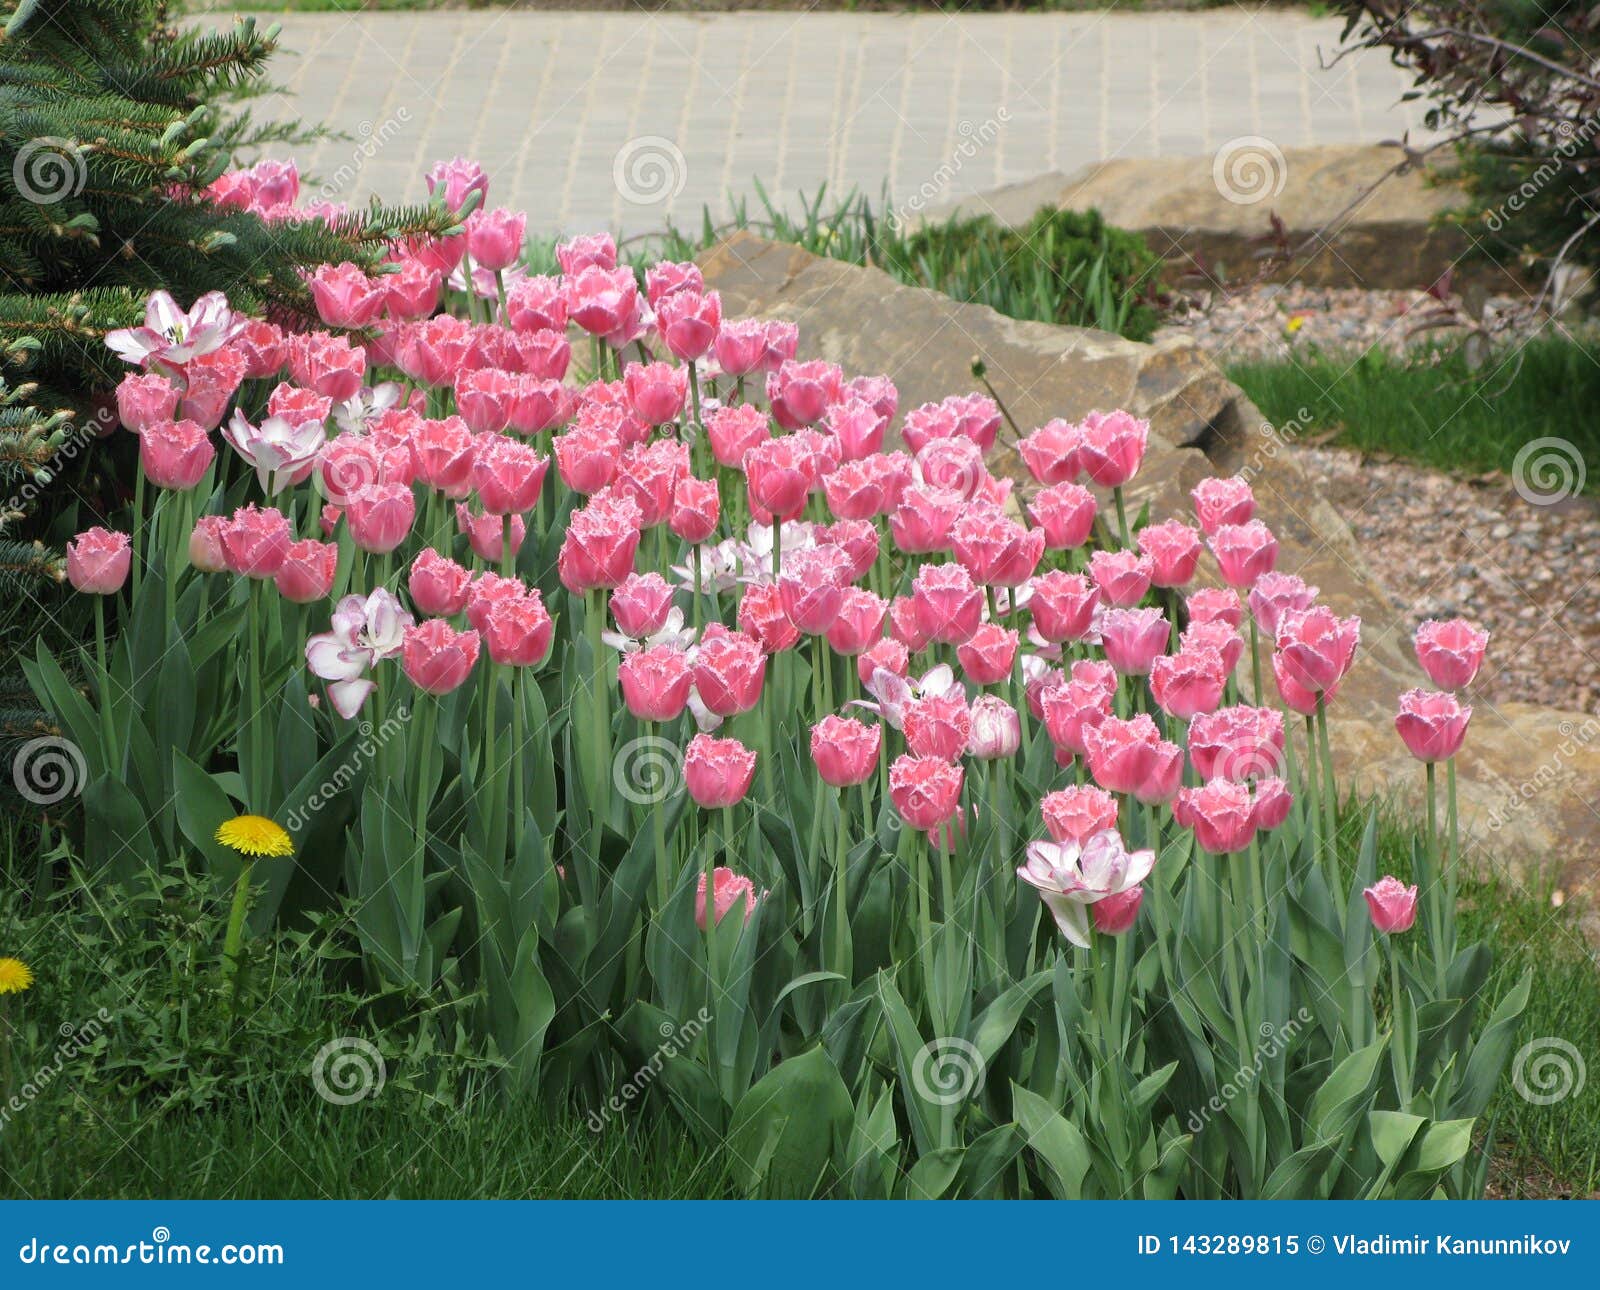 Pink-white Tulip Flowers in the Flowerbed Stock Image - Image of tulips ...